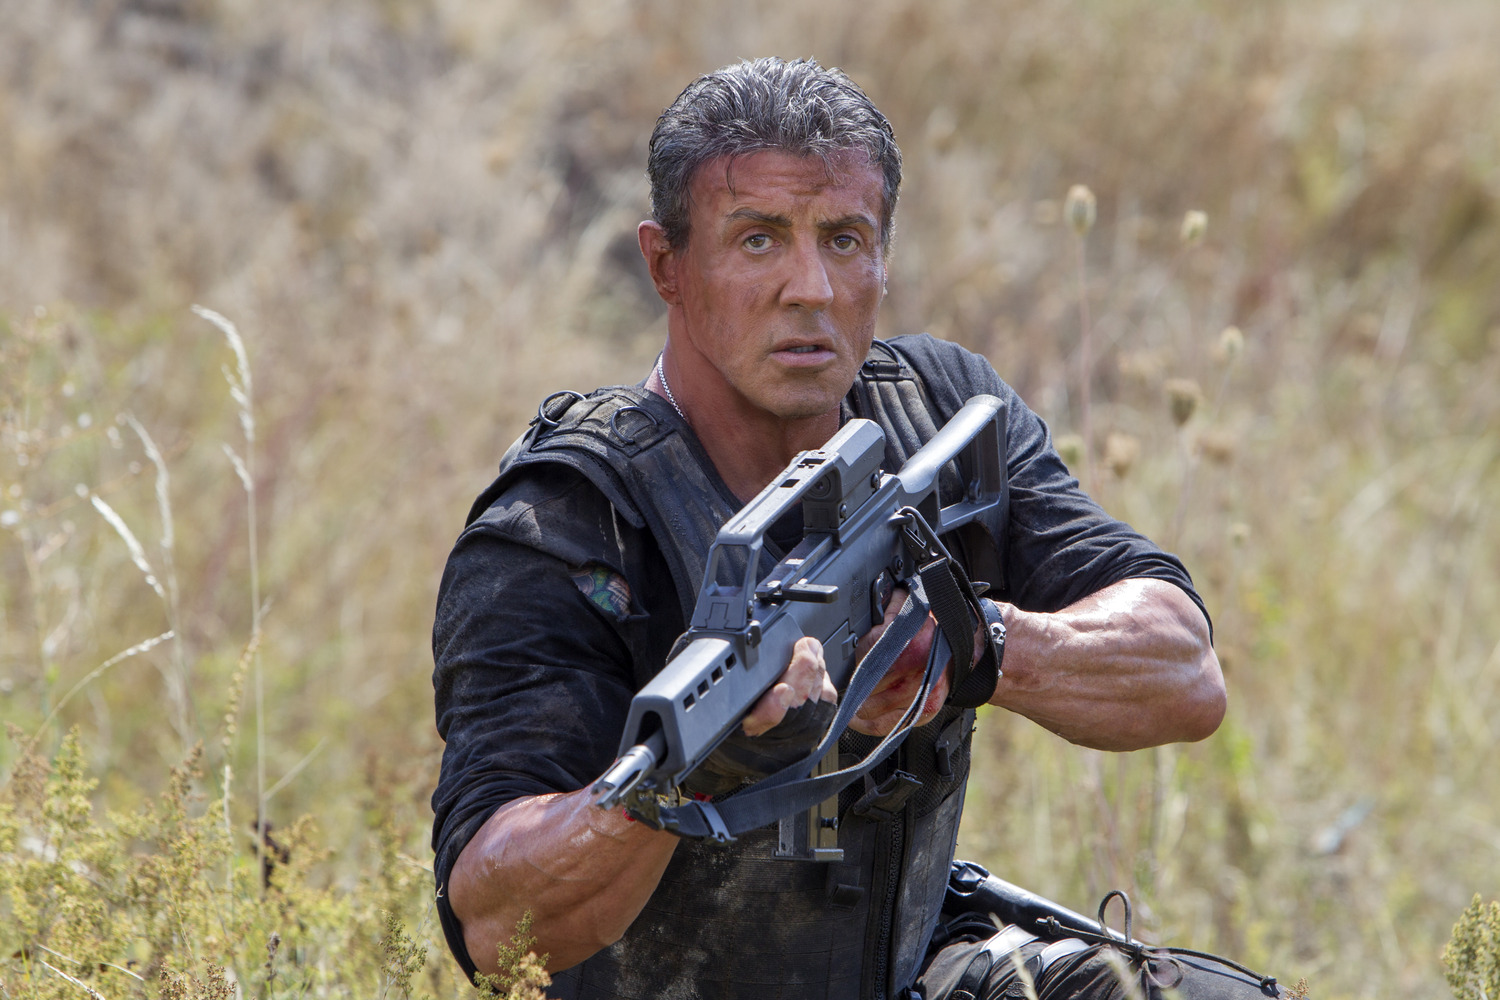 expendables-3-the-expendables-3-20-08-2014-33-g.jpg